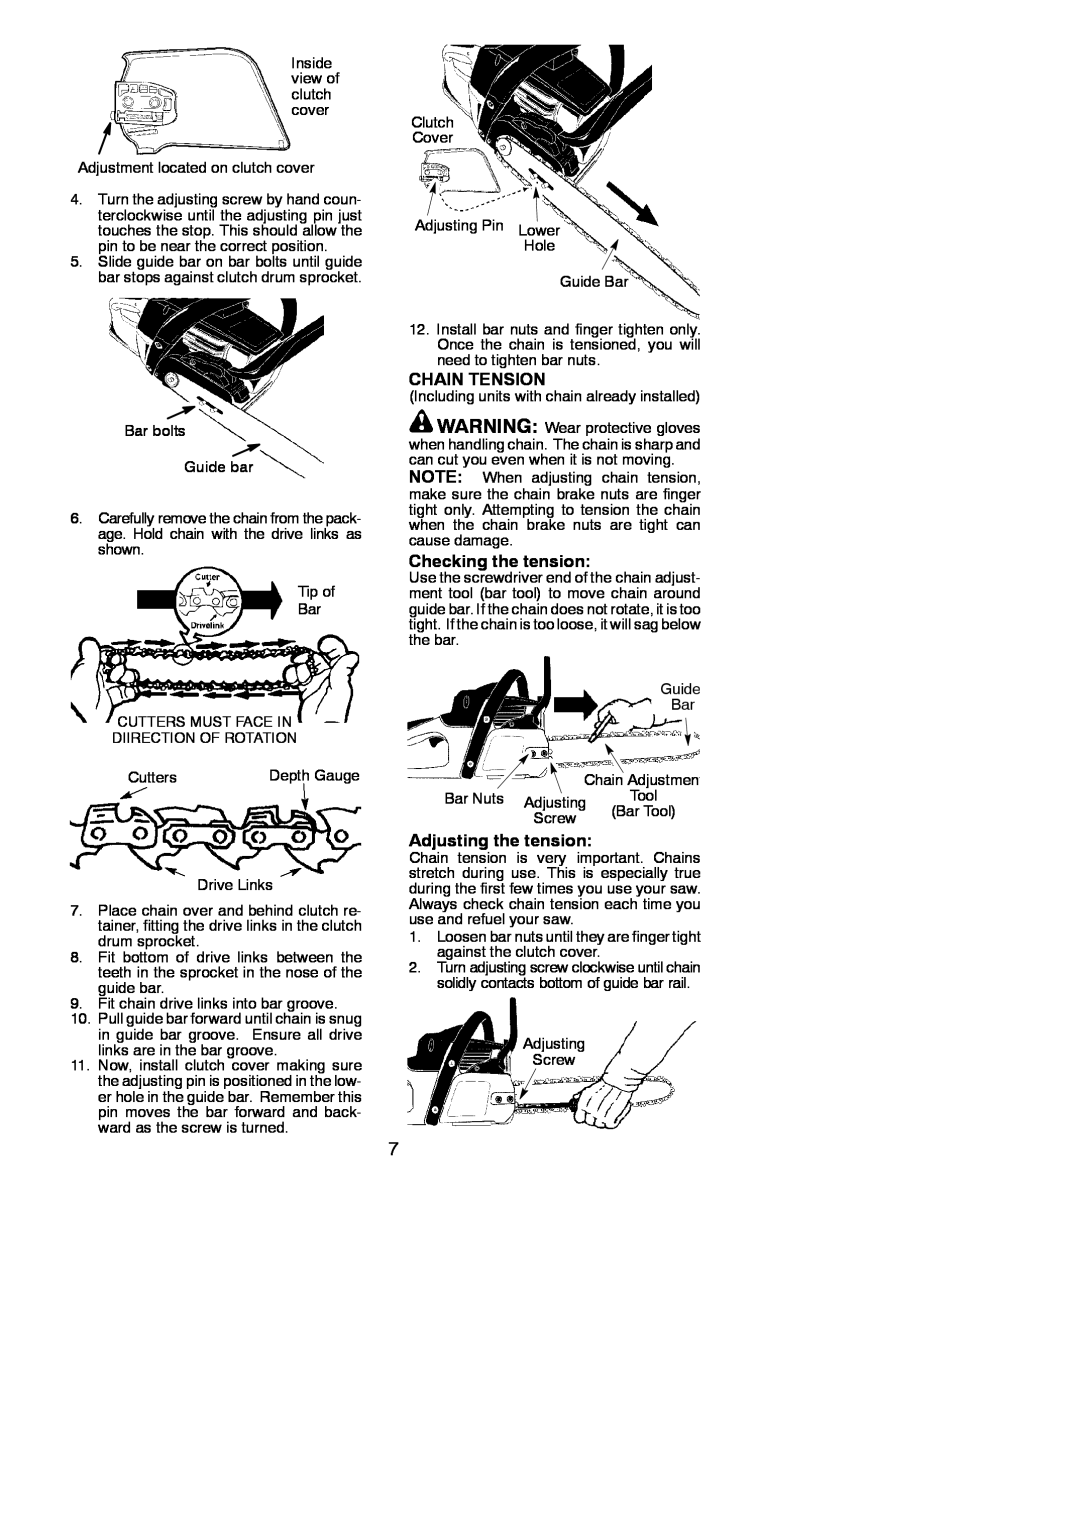 Poulan 545137231 instruction manual Chain Tension, Checking the tension, Adjusting the tension 